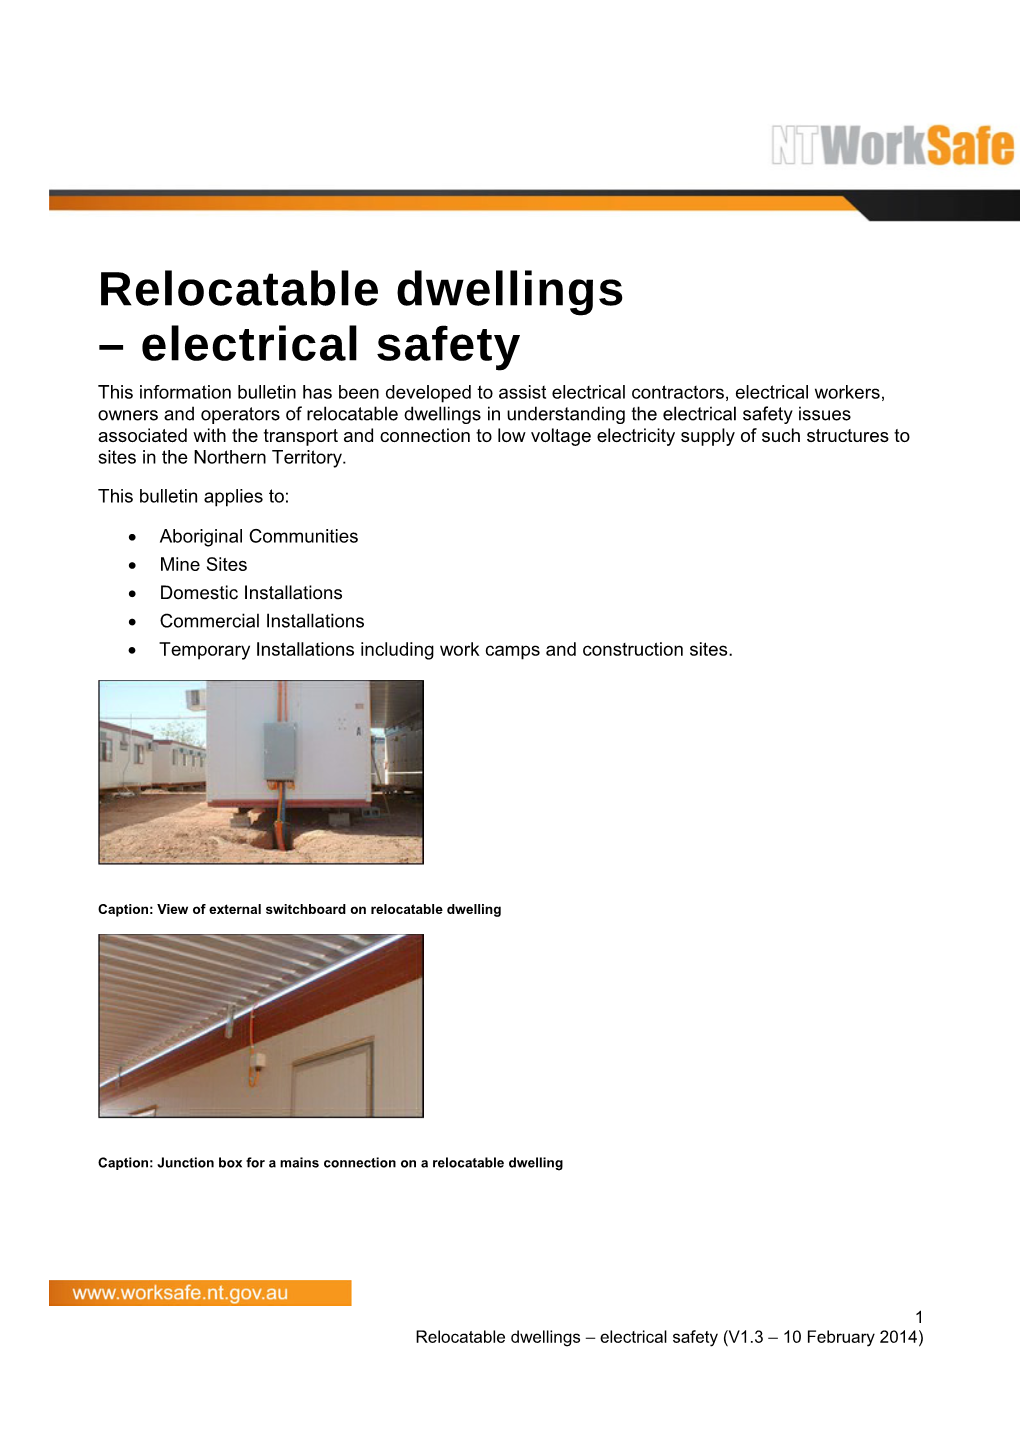 Relocatable Dwellings - Electrical Safety